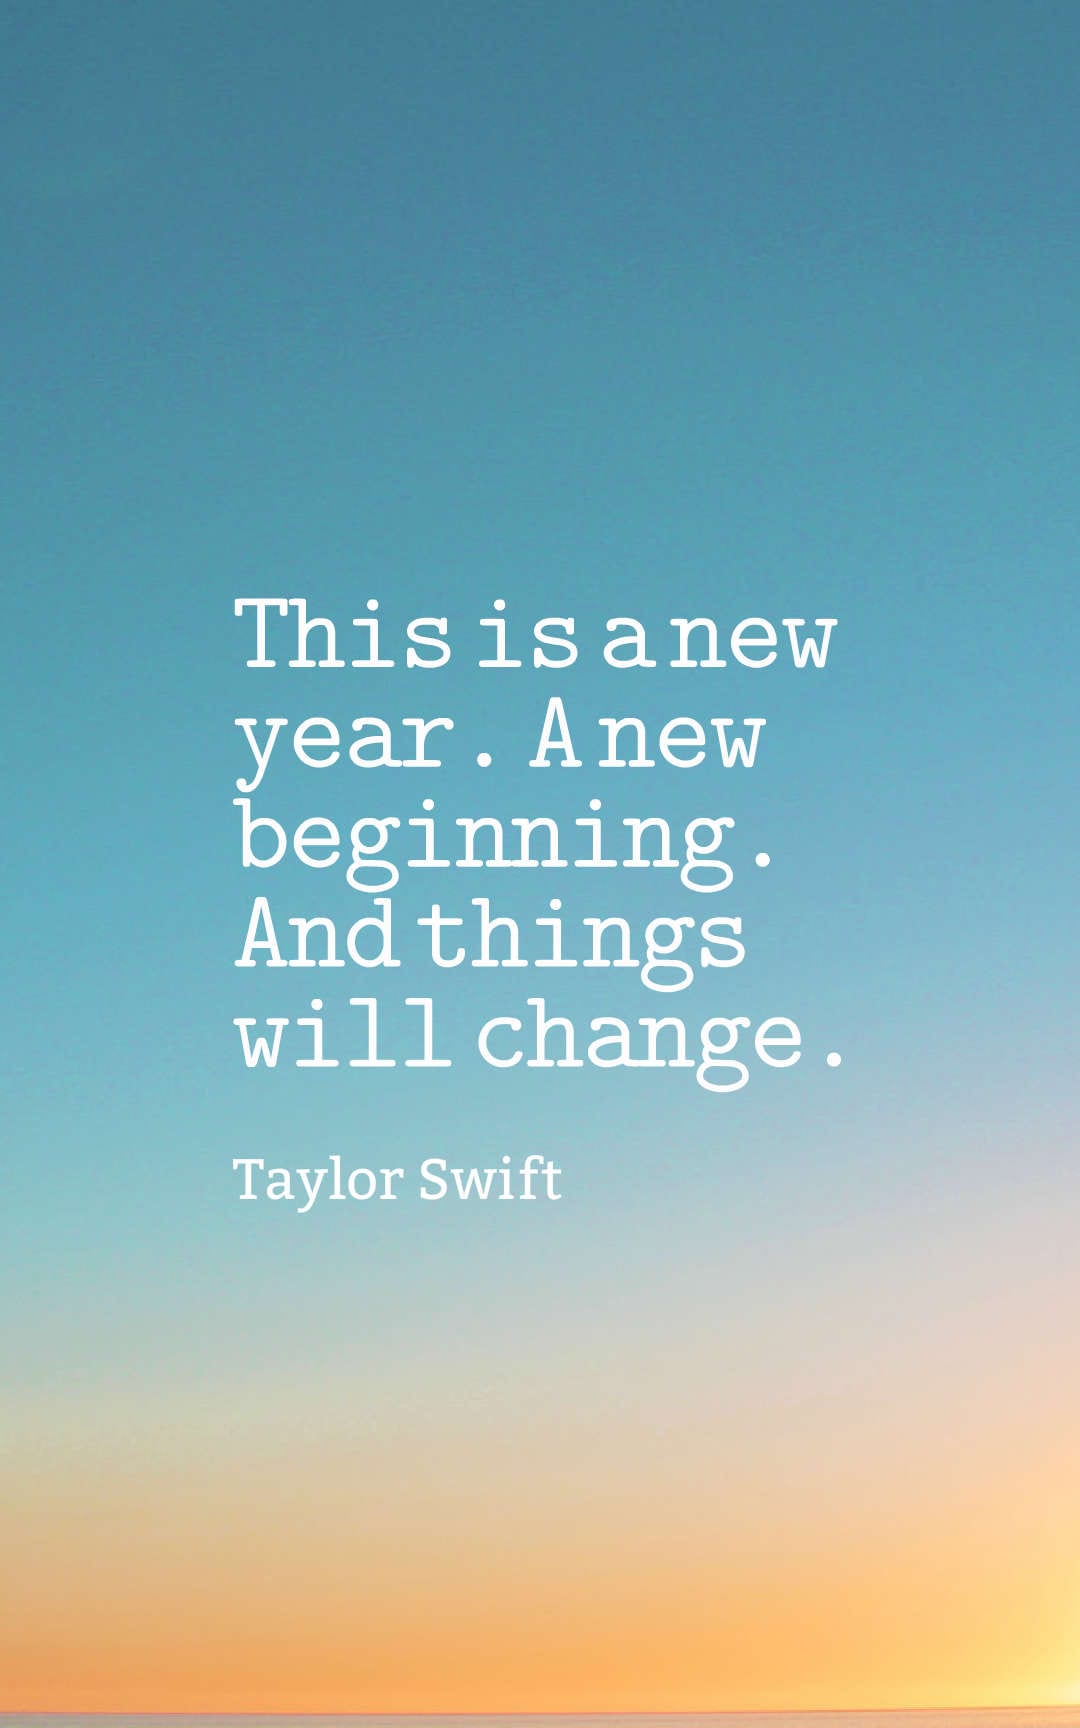  New Year Quotes New Beginning in the world The ultimate guide 